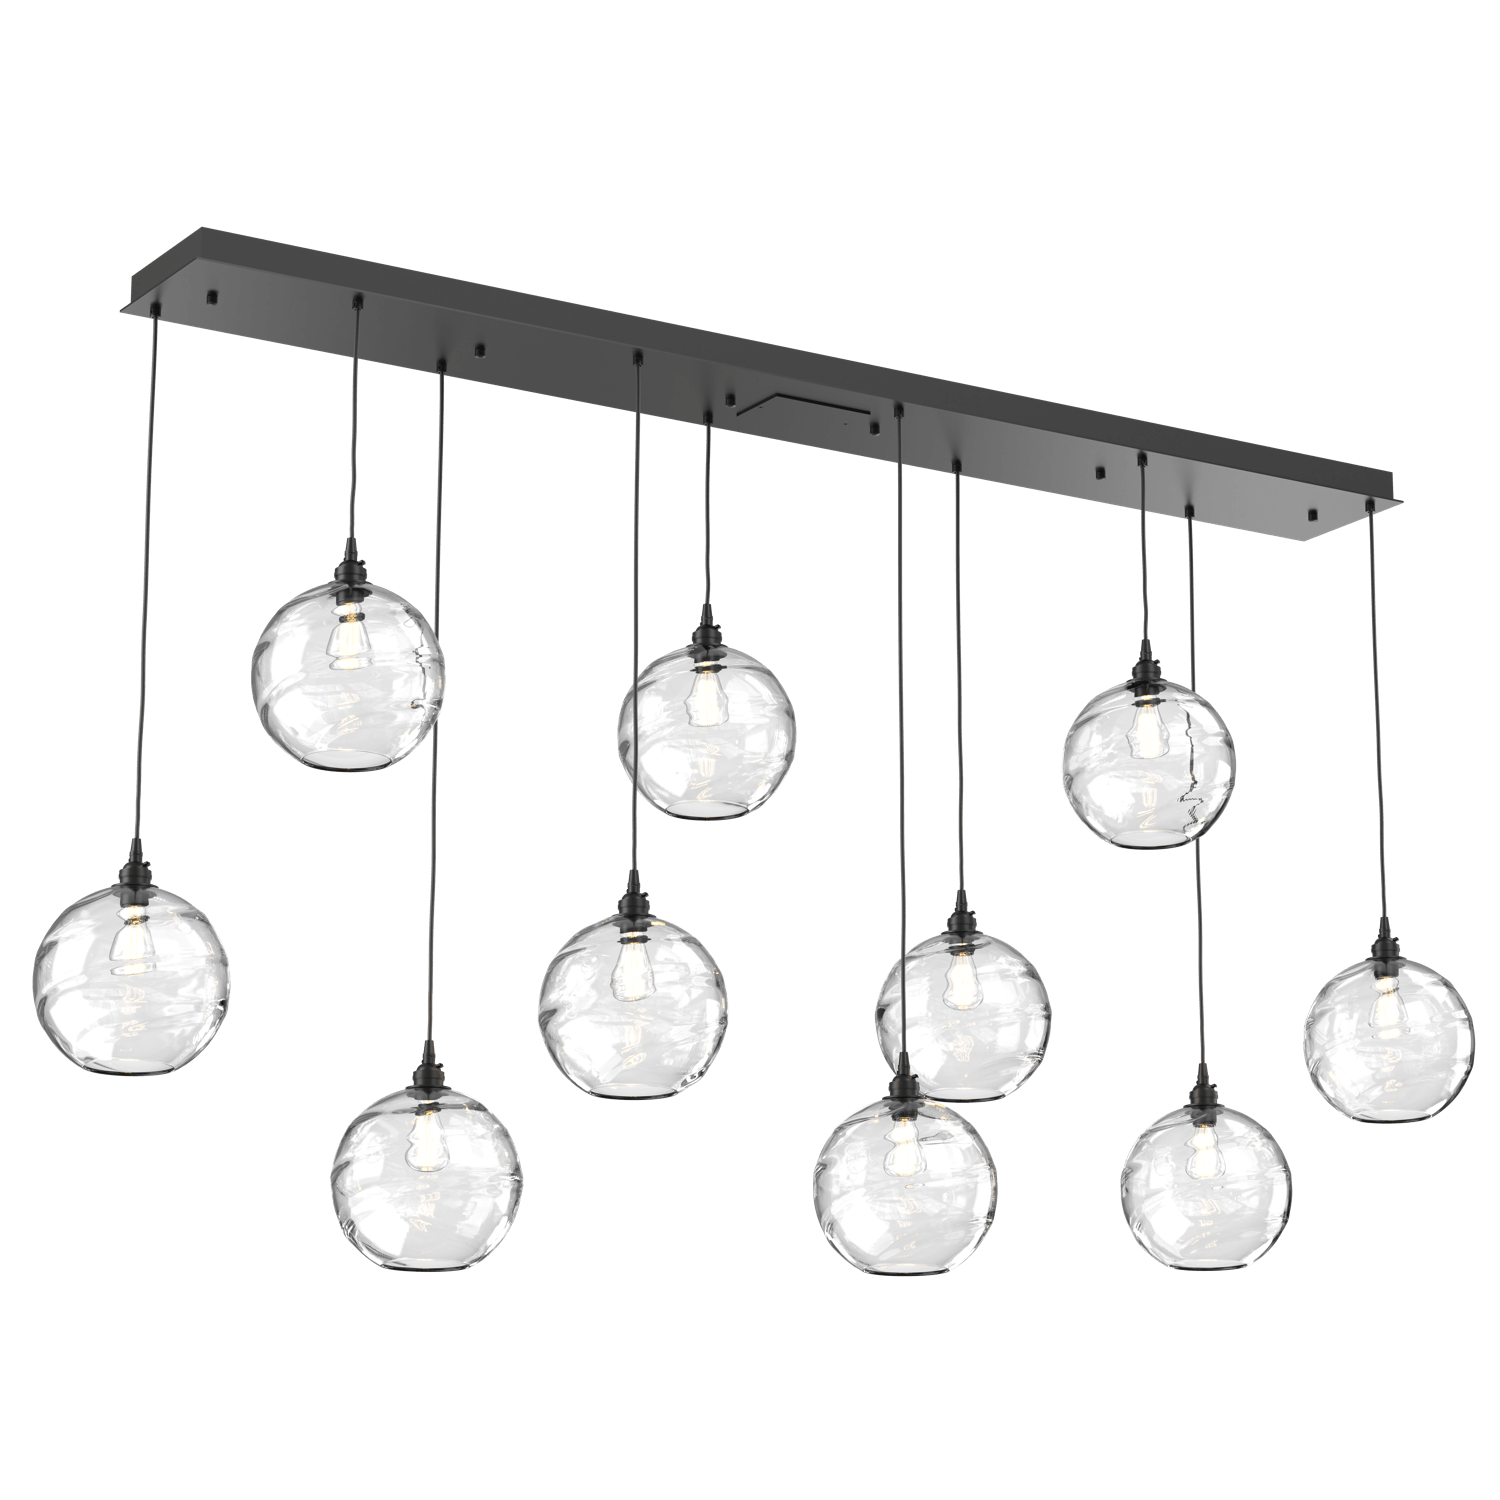 PLB0047-10-MB-OC-Hammerton-Studio-Optic-Blown-Glass-Terra-10-light-linear-pendant-chandelier-with-matte-black-finish-and-optic-clear-blown-glass-shades-and-incandescent-lamping